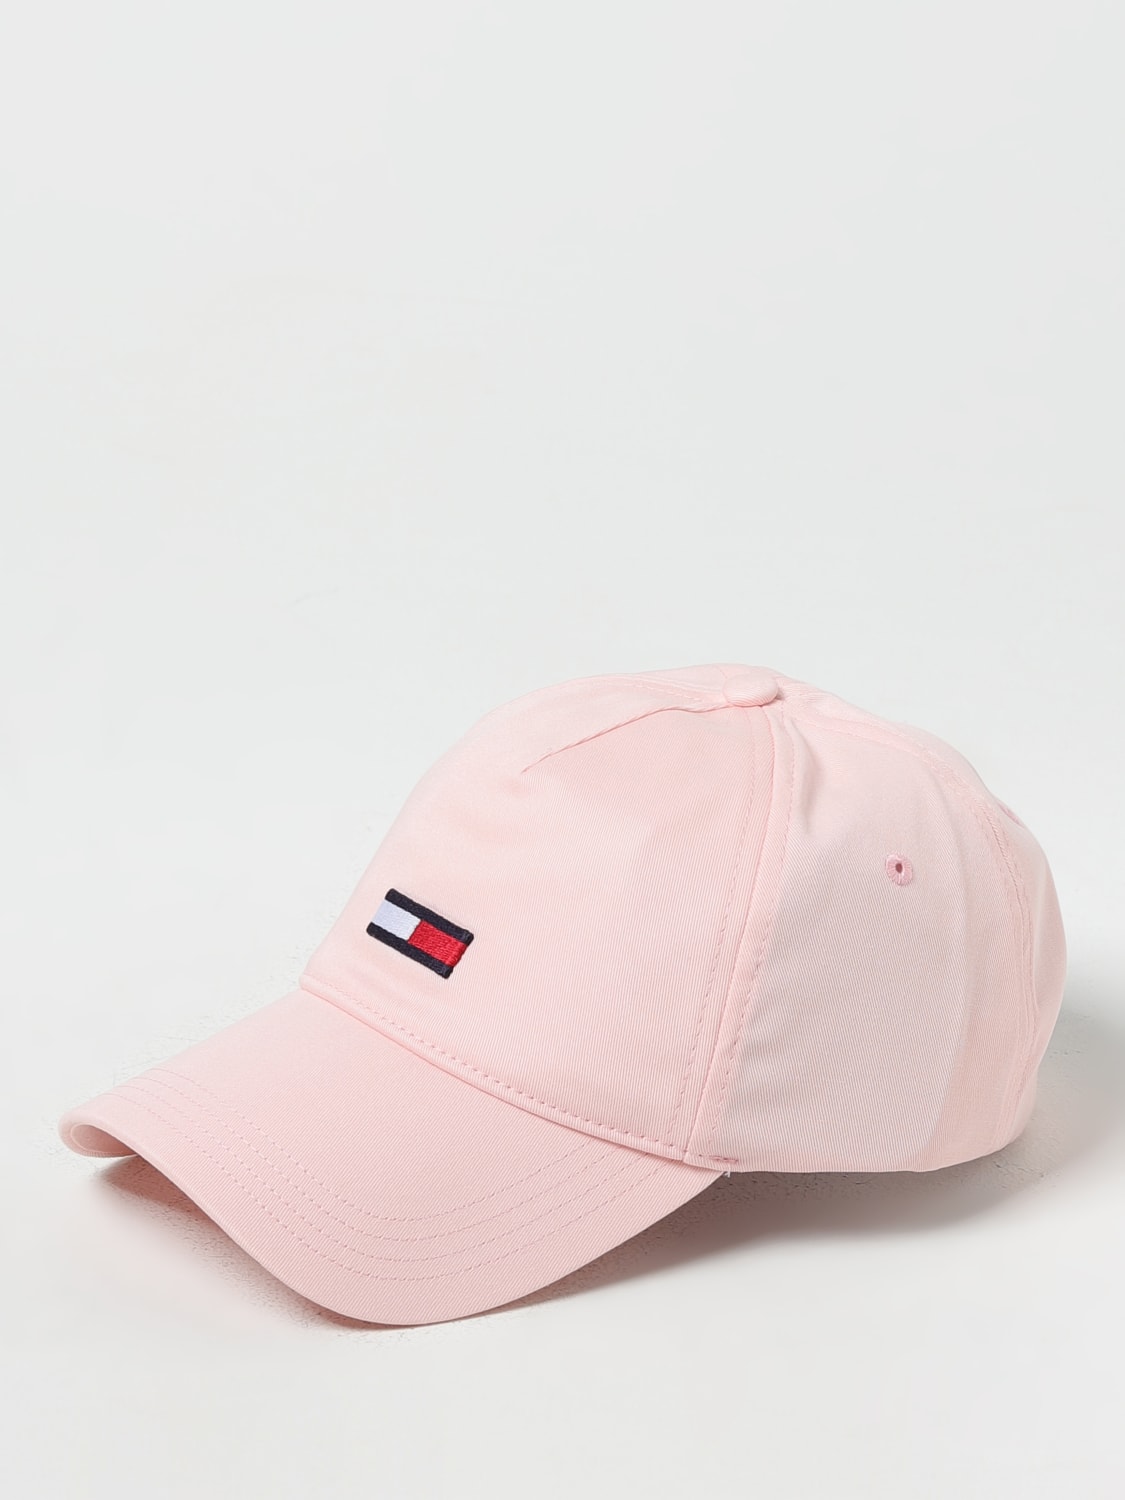 hat HILFIGER: Tommy women hat - Hilfiger at online | AW0AW14986 Pink TOMMY for